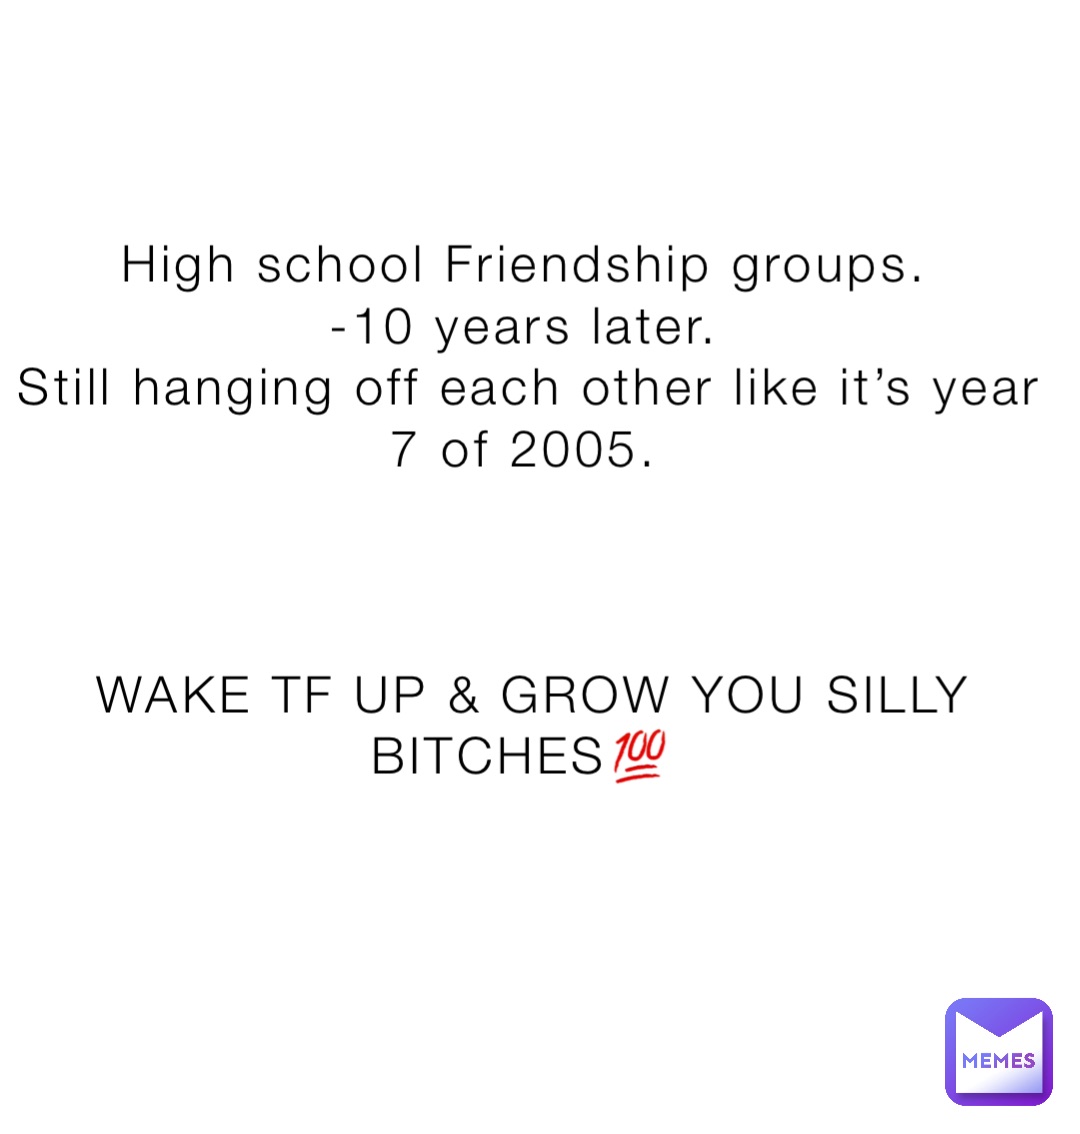 High school Friendship groups.
-10 years later.
Still hanging off each other like it’s year 7 of 2005.



WAKE TF UP & GROW YOU SILLY BITCHES💯